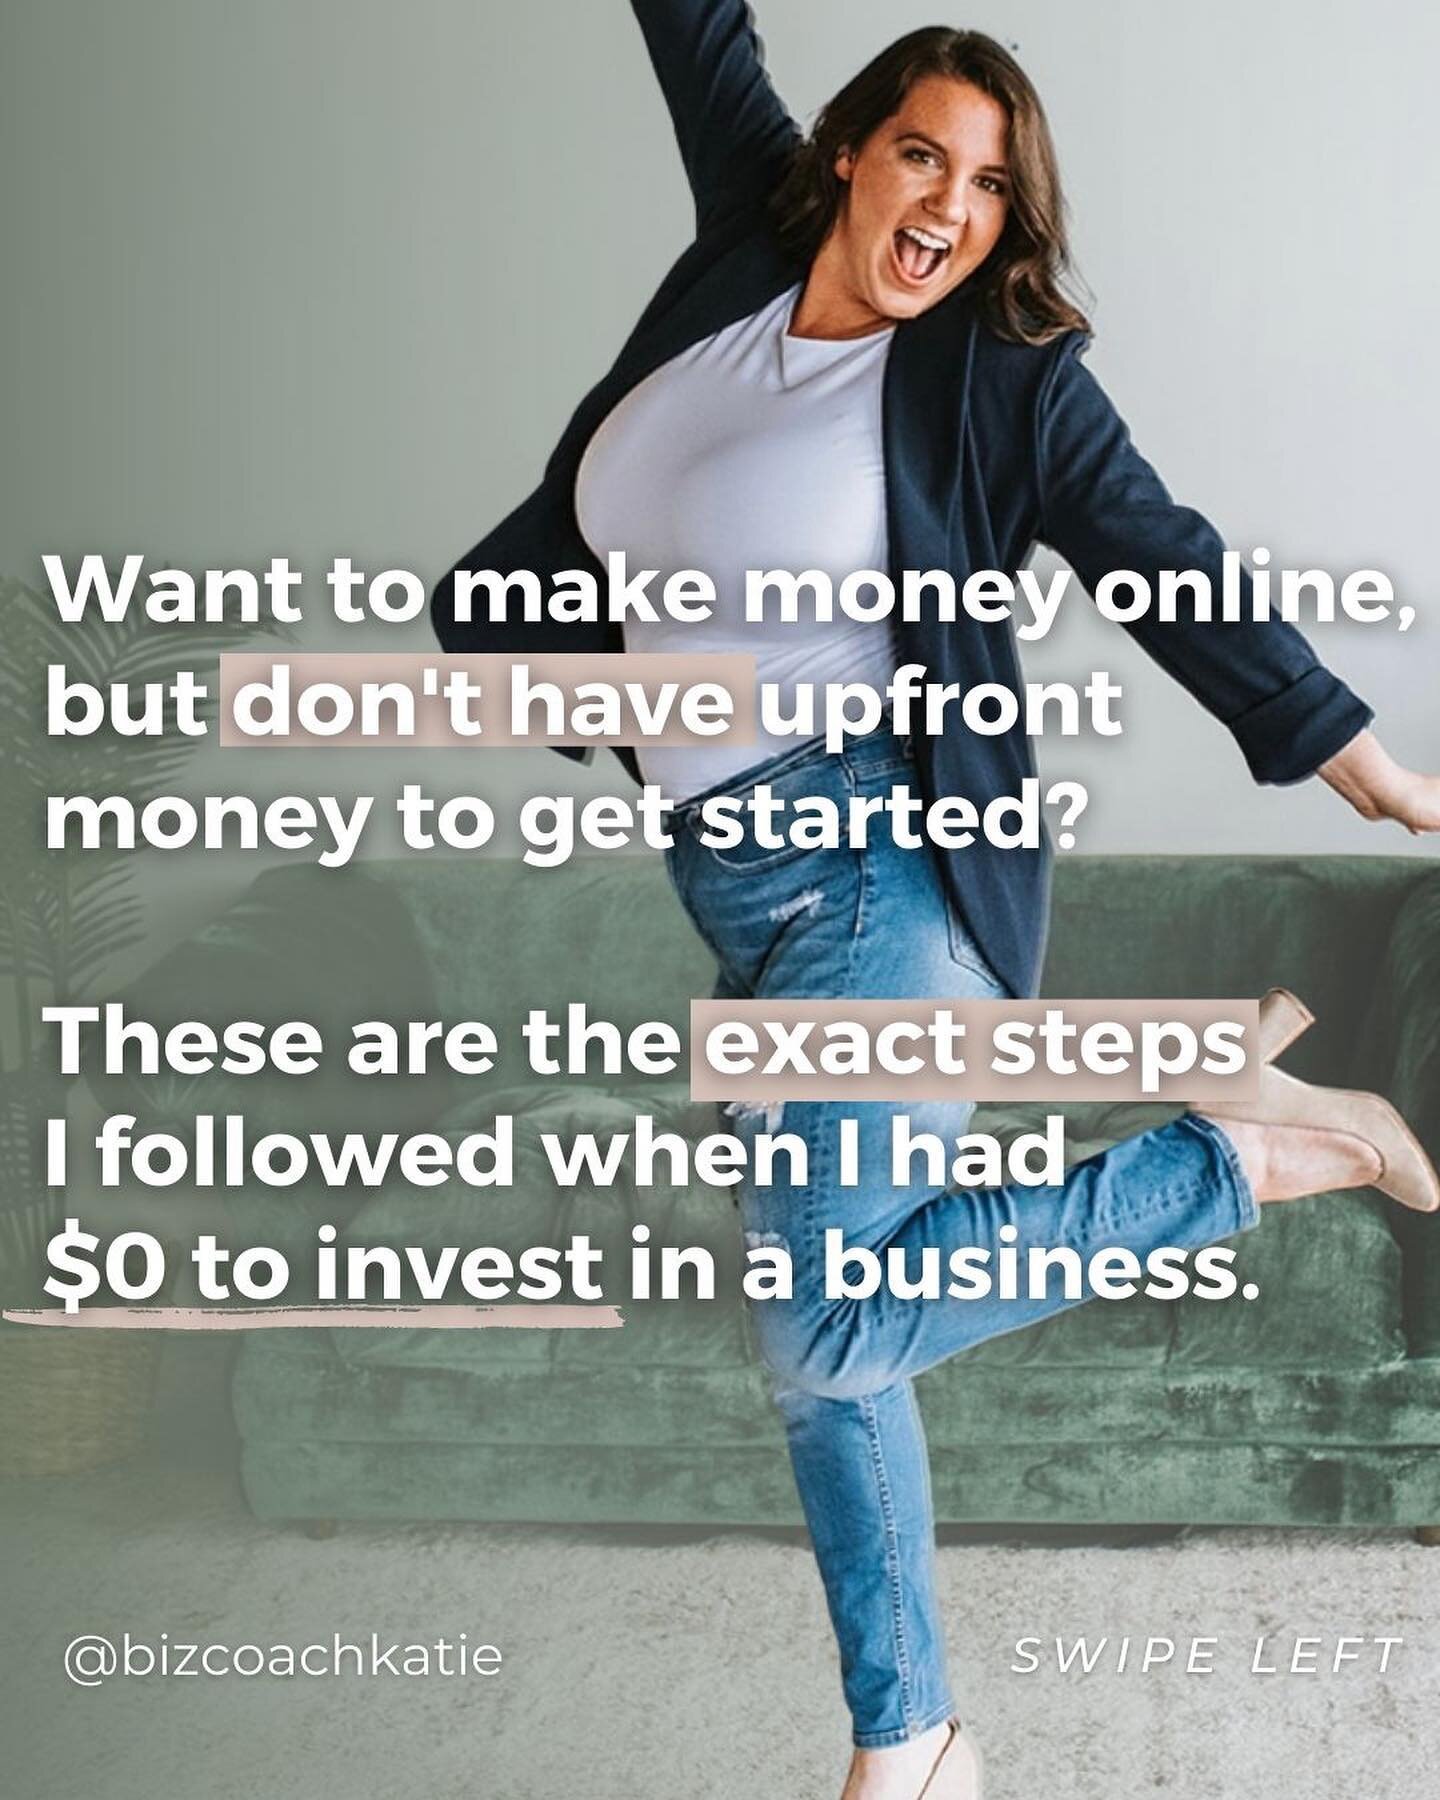 Where there&rsquo;s a will, there&rsquo;s a way&hellip;

The people in my world know this.  And they are strong advocates for themselves.  They will do whatever it takes to make 💩 happen - and they do. 

If you want to make money online, working onl